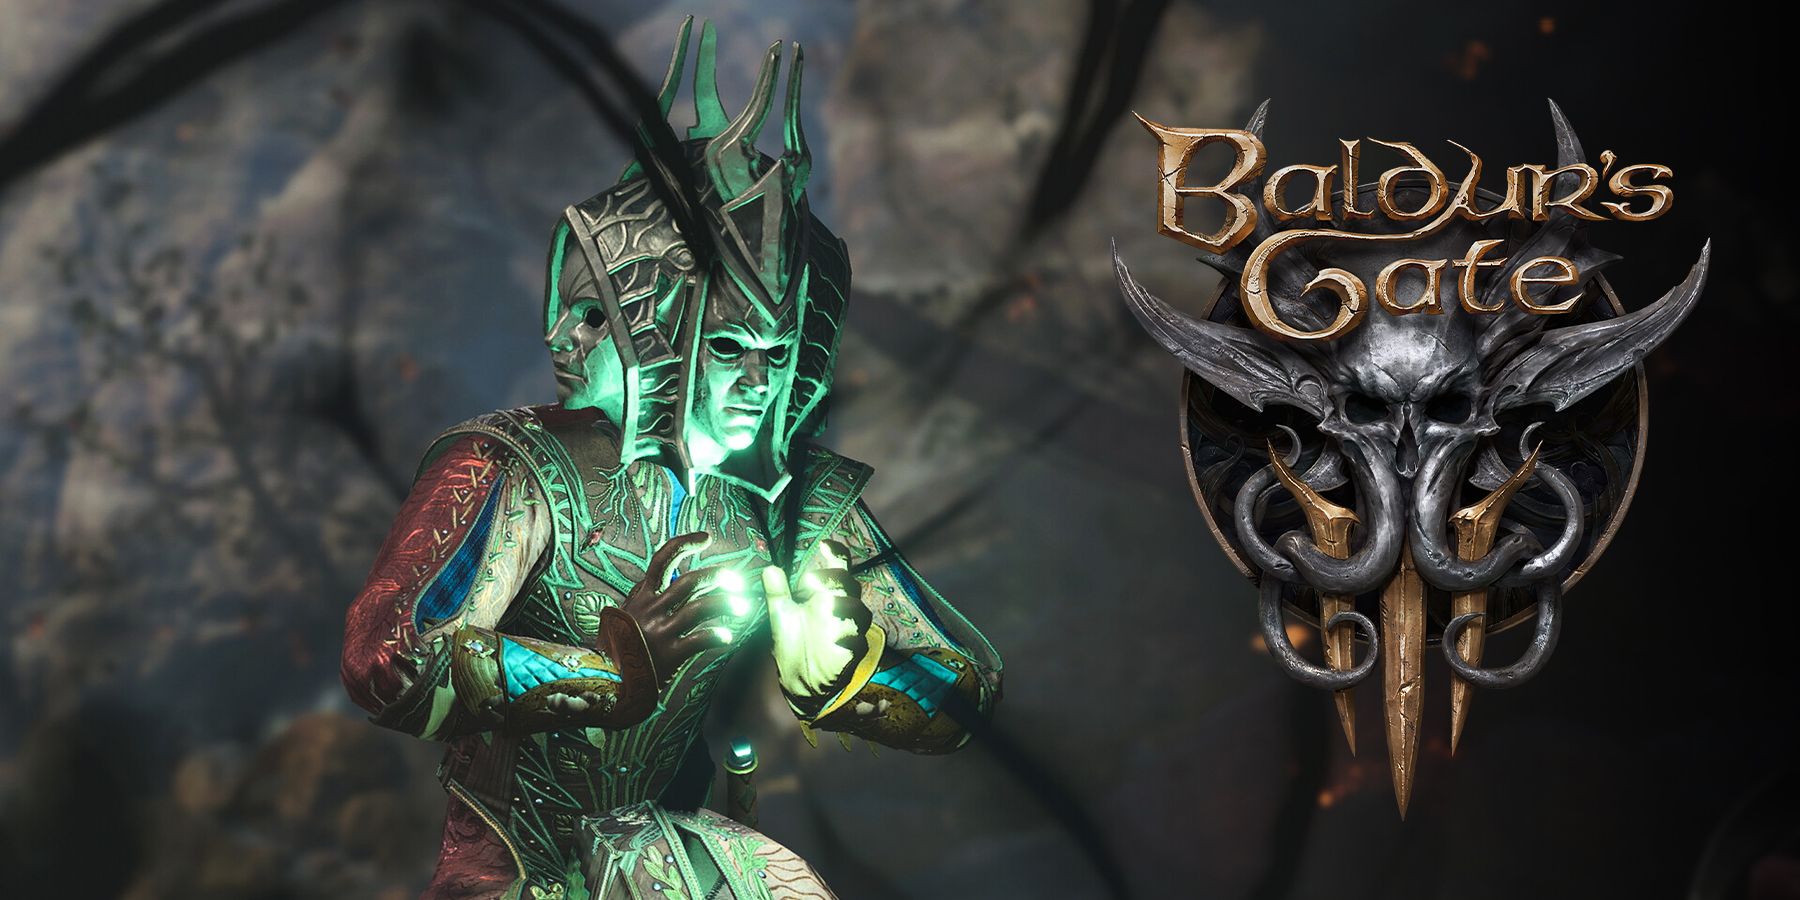 Some Baldur’s Gate 3 Players Will Get the Digital Deluxe Edition for Free